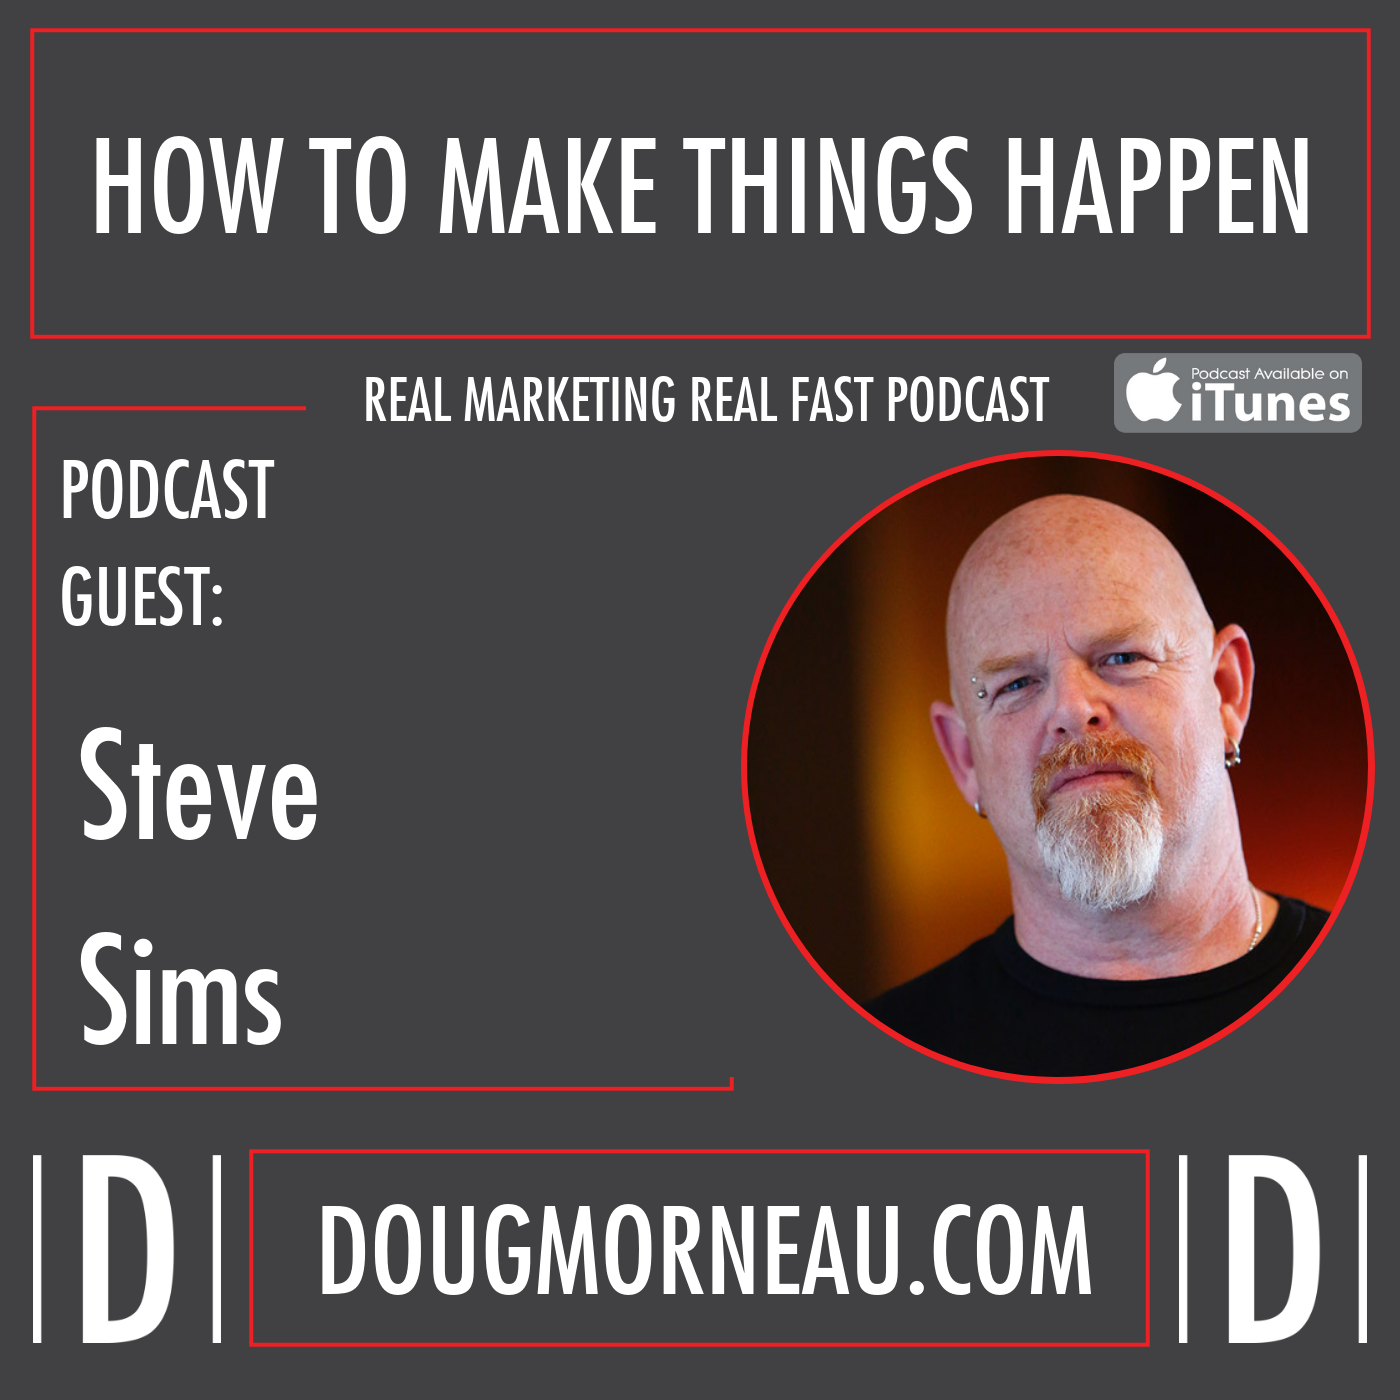 HOW TO MAKE THINGS HAPPEN Steve Sims DOUG MORNEAU - REAL MARKETING REAL FAST PODCAST